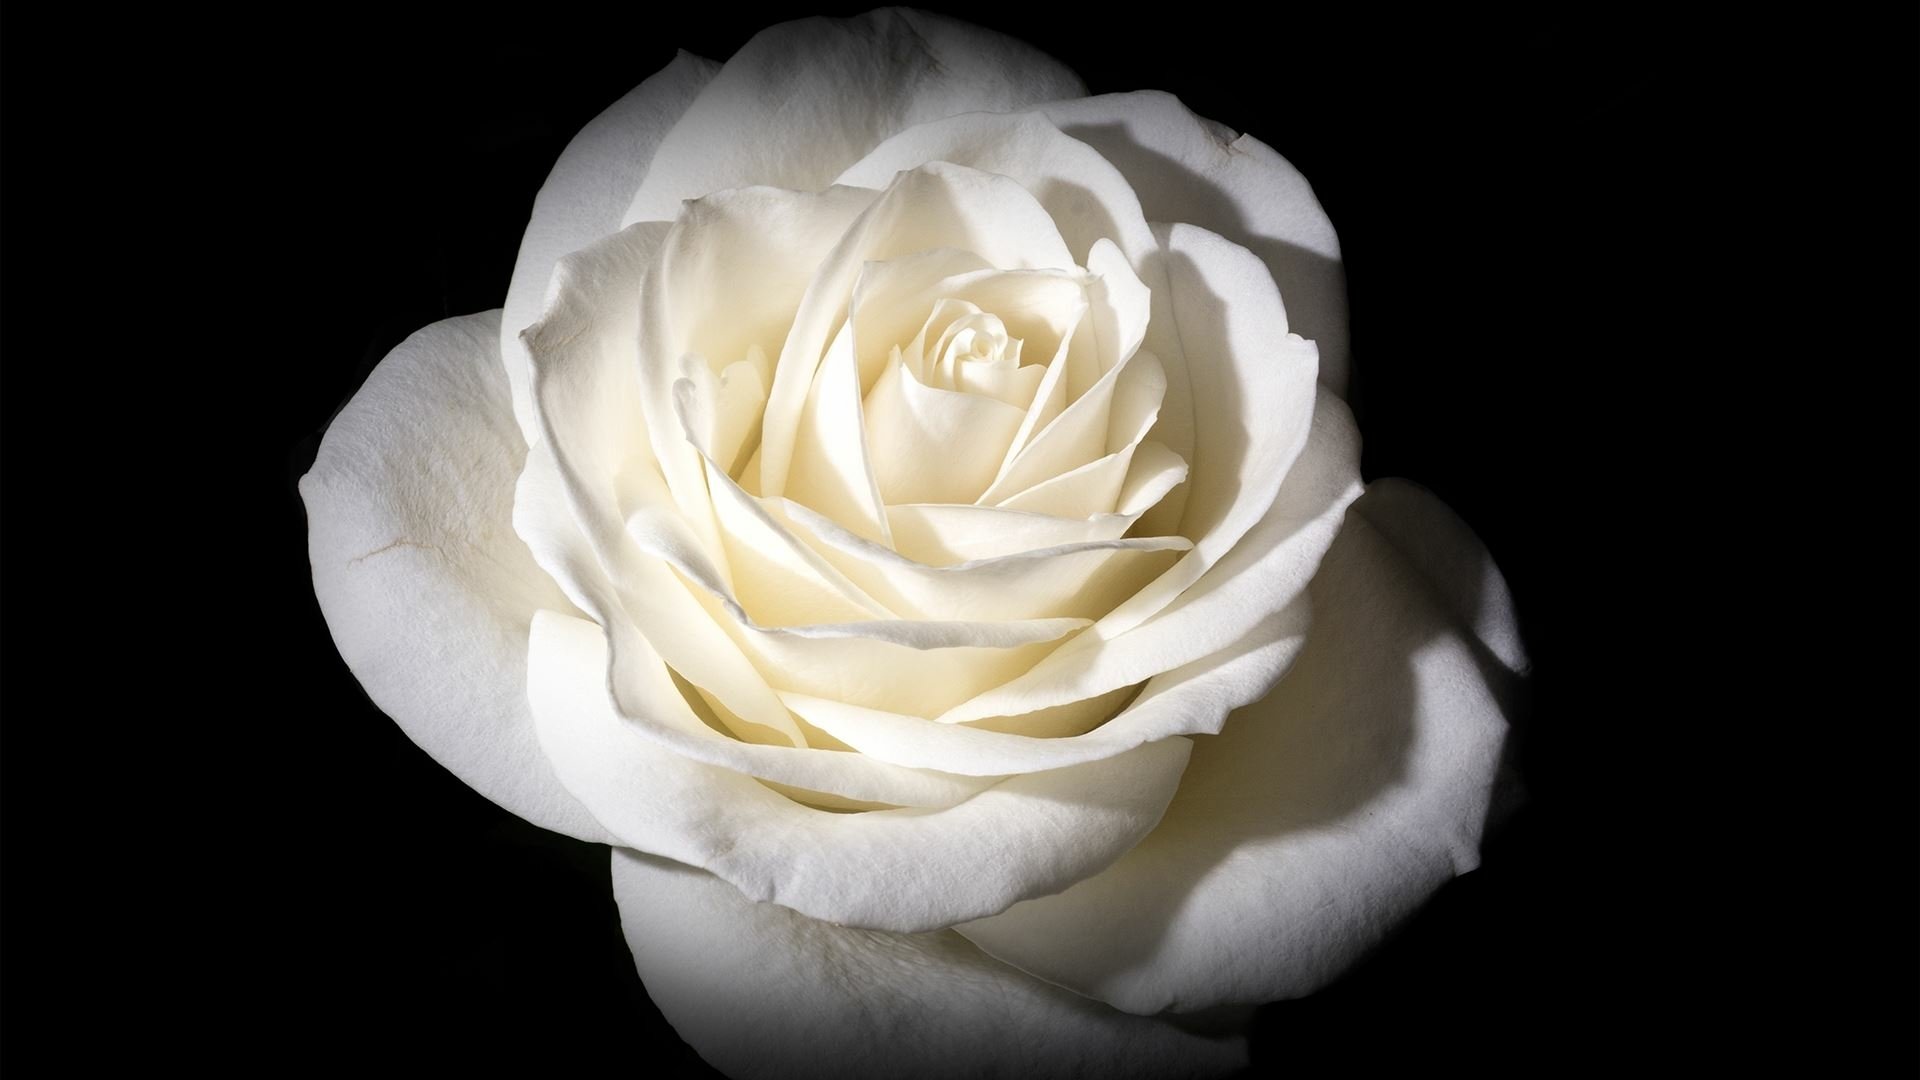 hd wallpapers of flowers of white rose